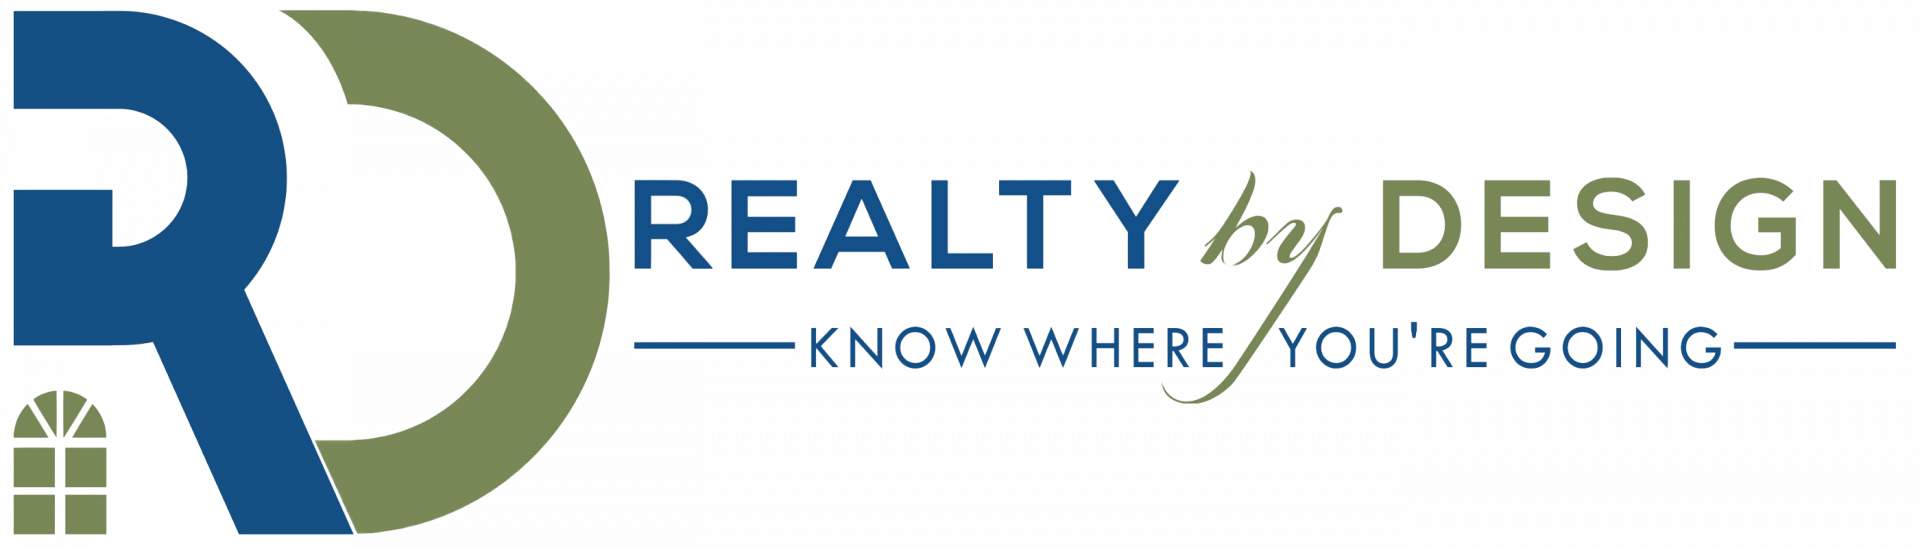 Realty By Design logo